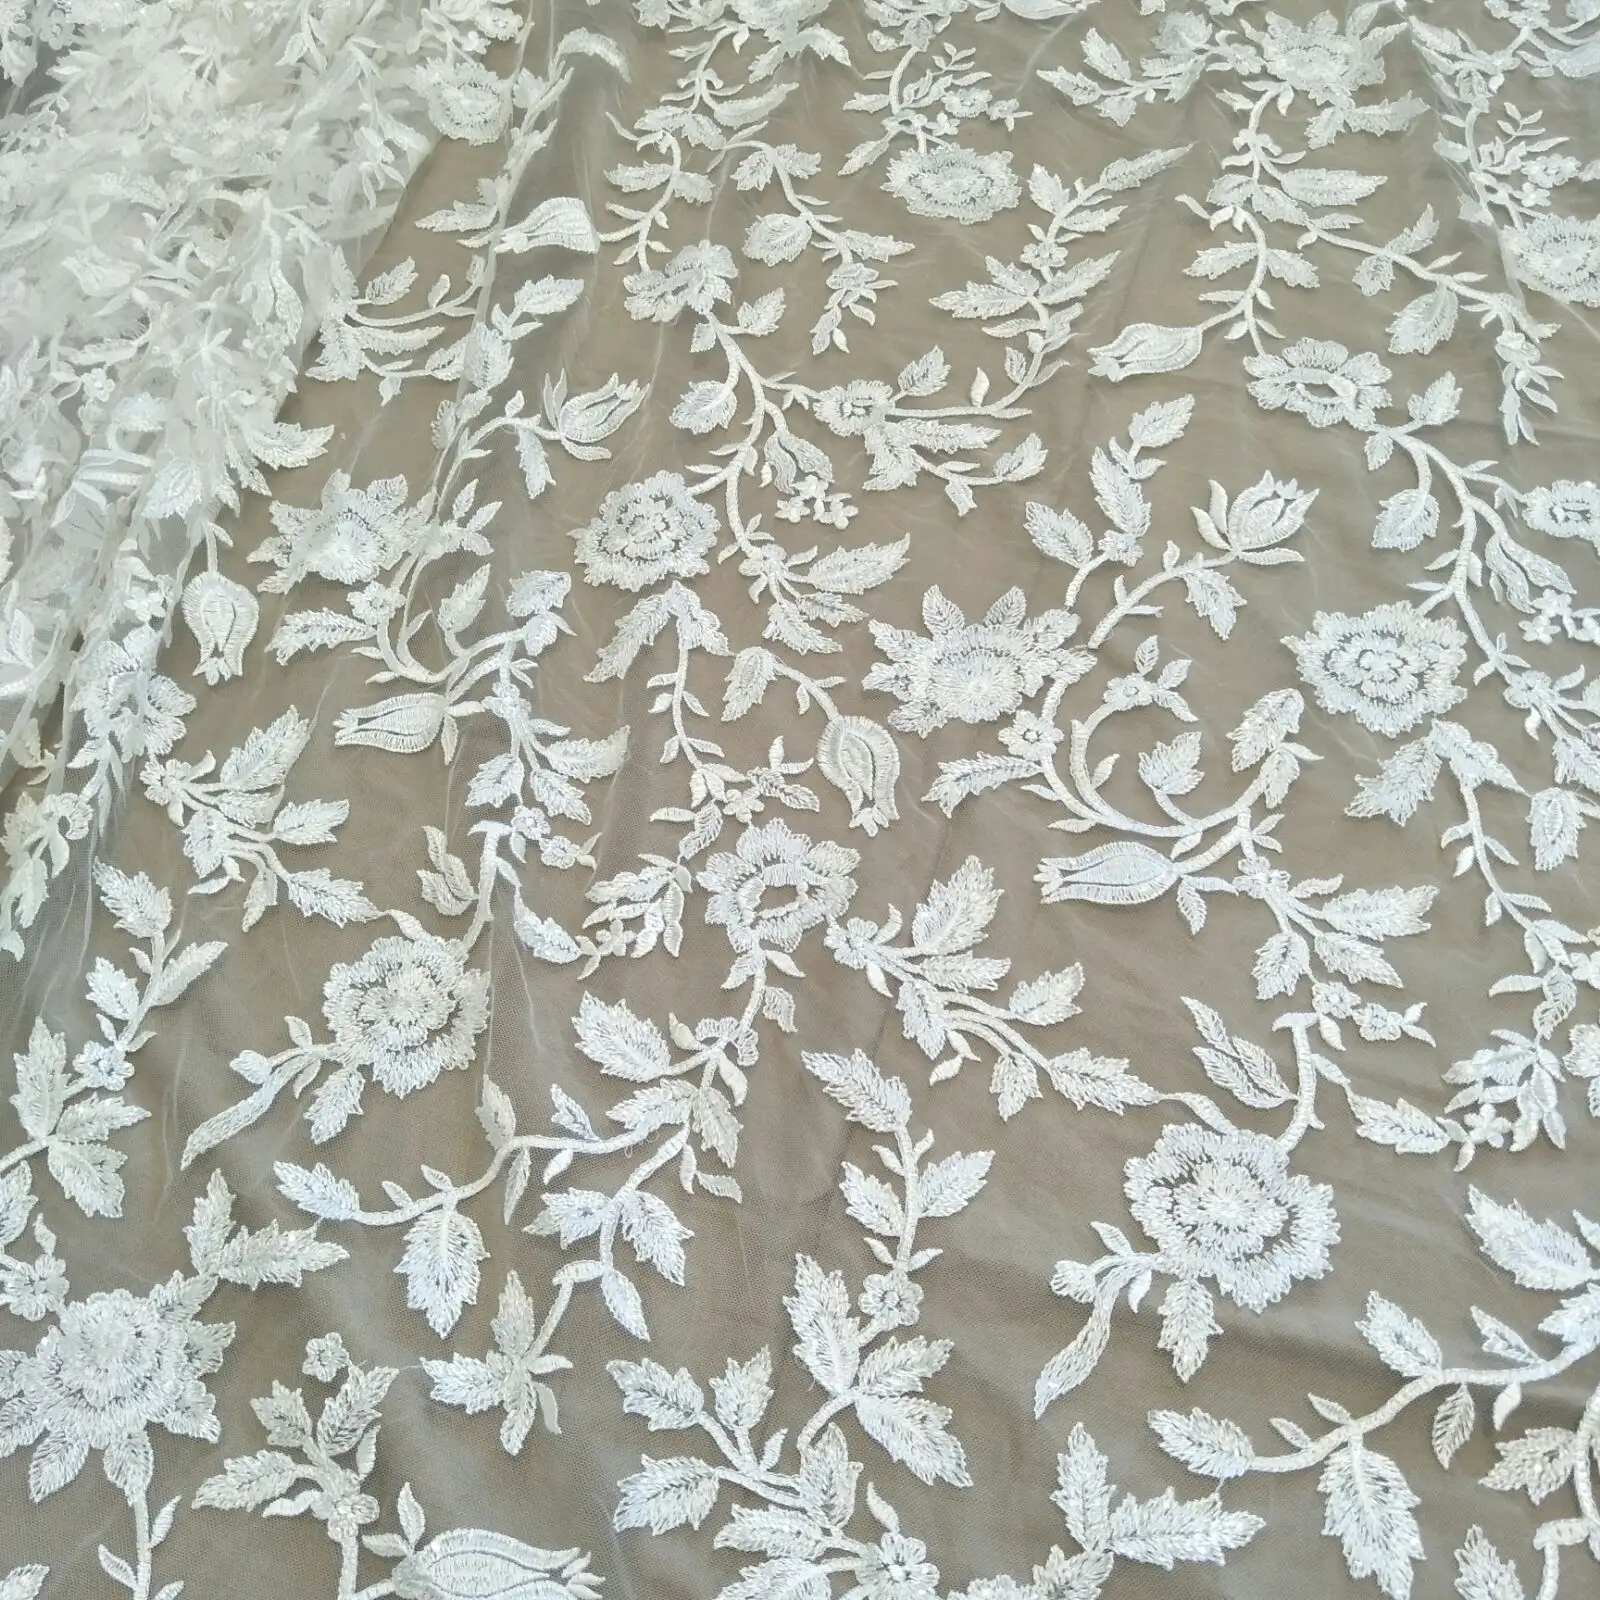 2022 summer full flower ivory white dress wedding dress lace fabric with sequin width 130cm